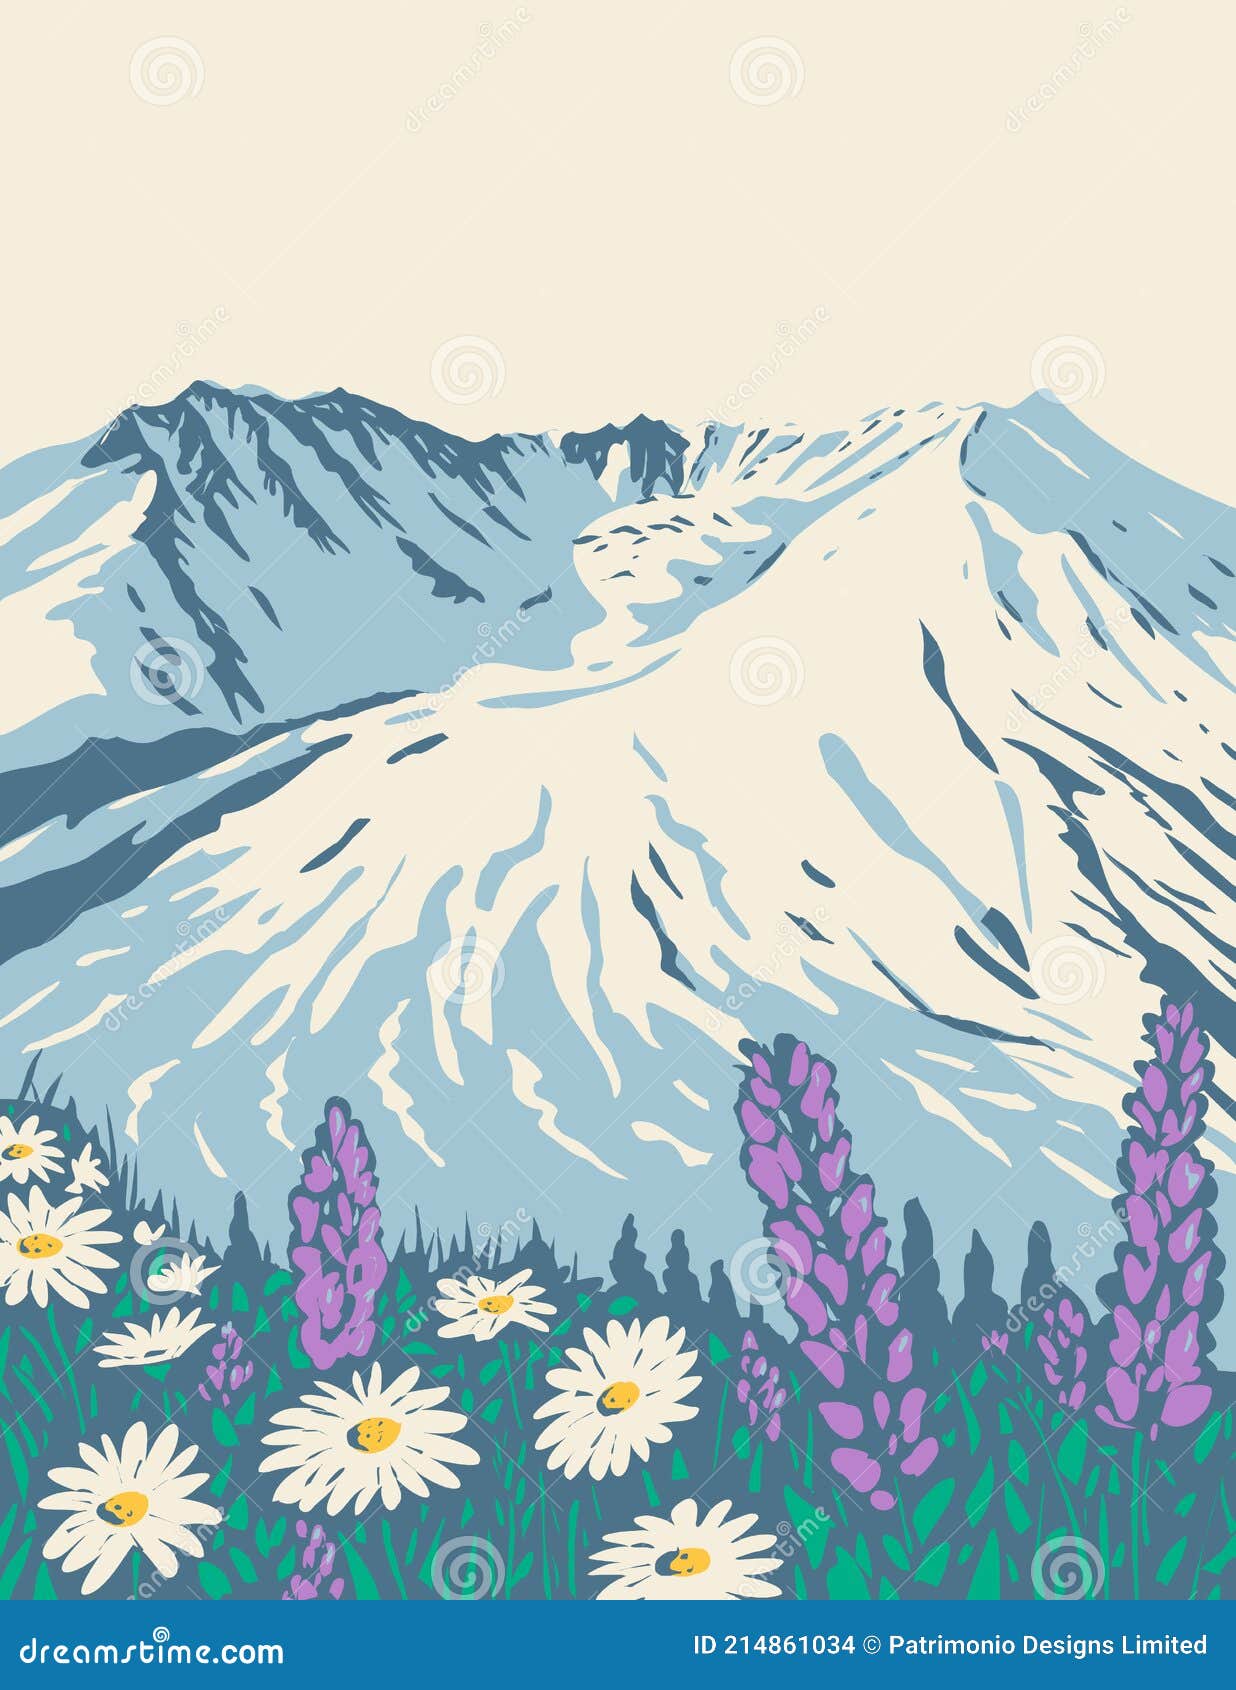 the mount st helens national volcanic monument within gifford pinchot national forest in washington state wpa poster art